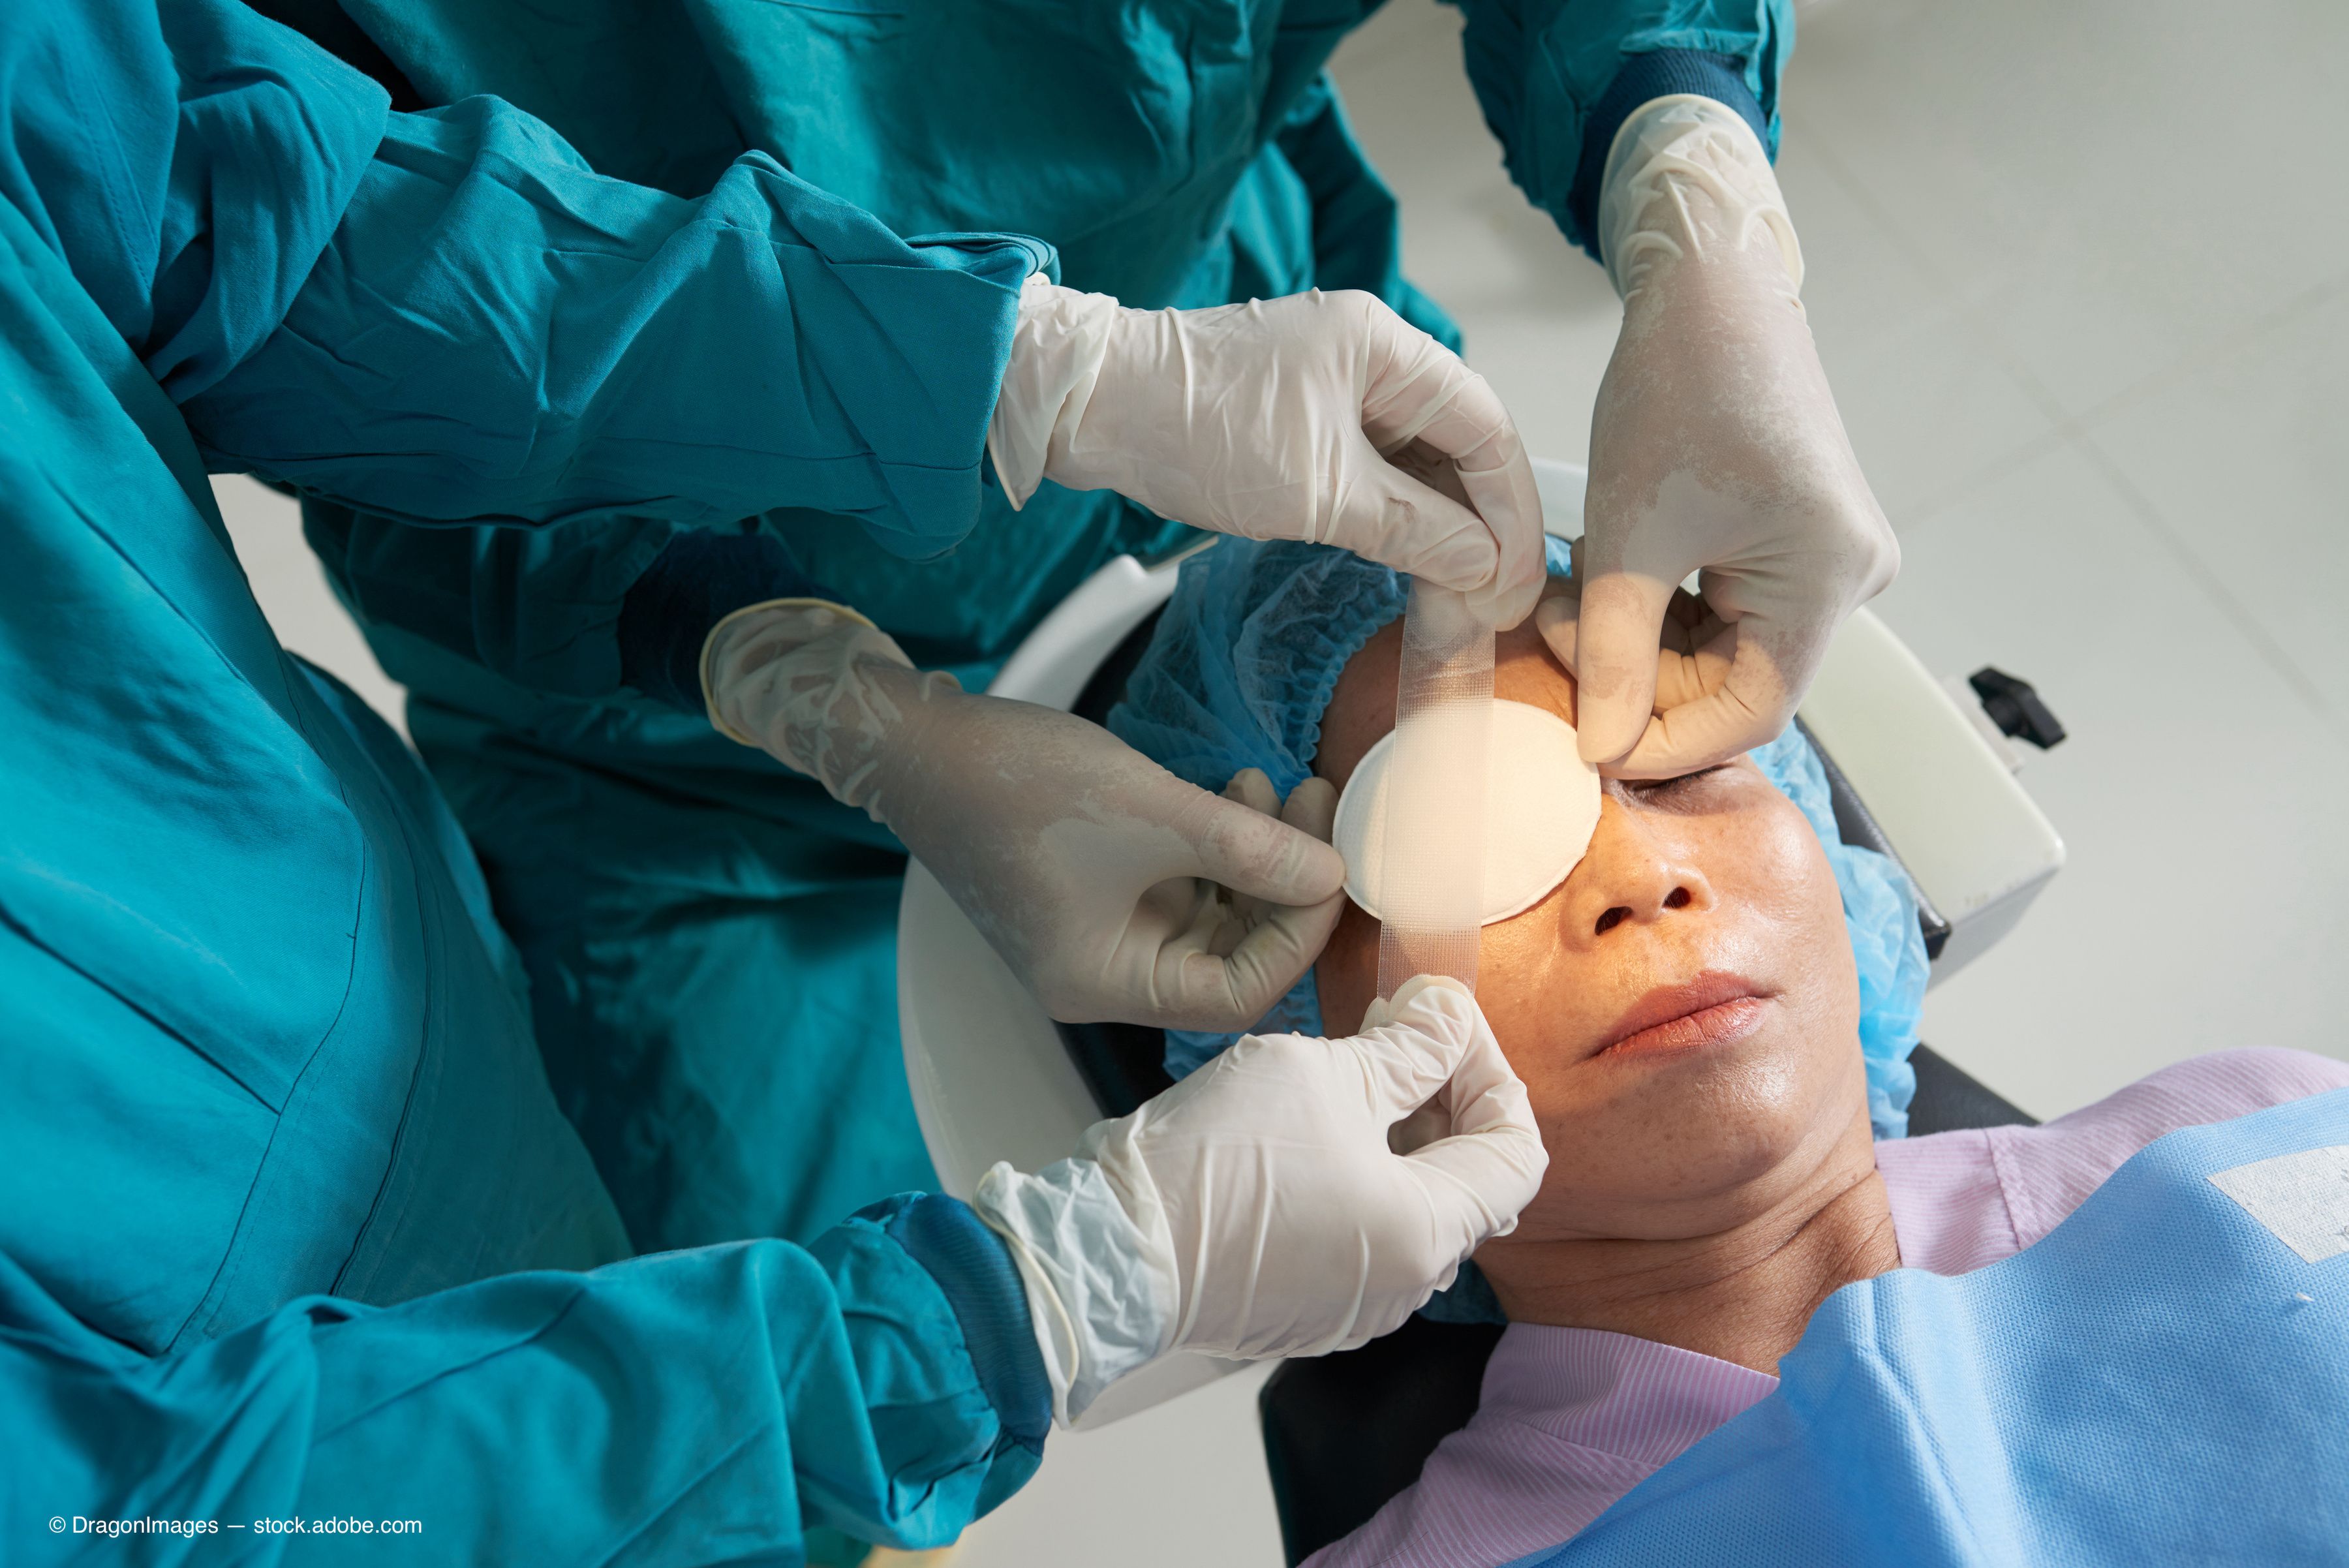 Postoperative surgical care for cataracts